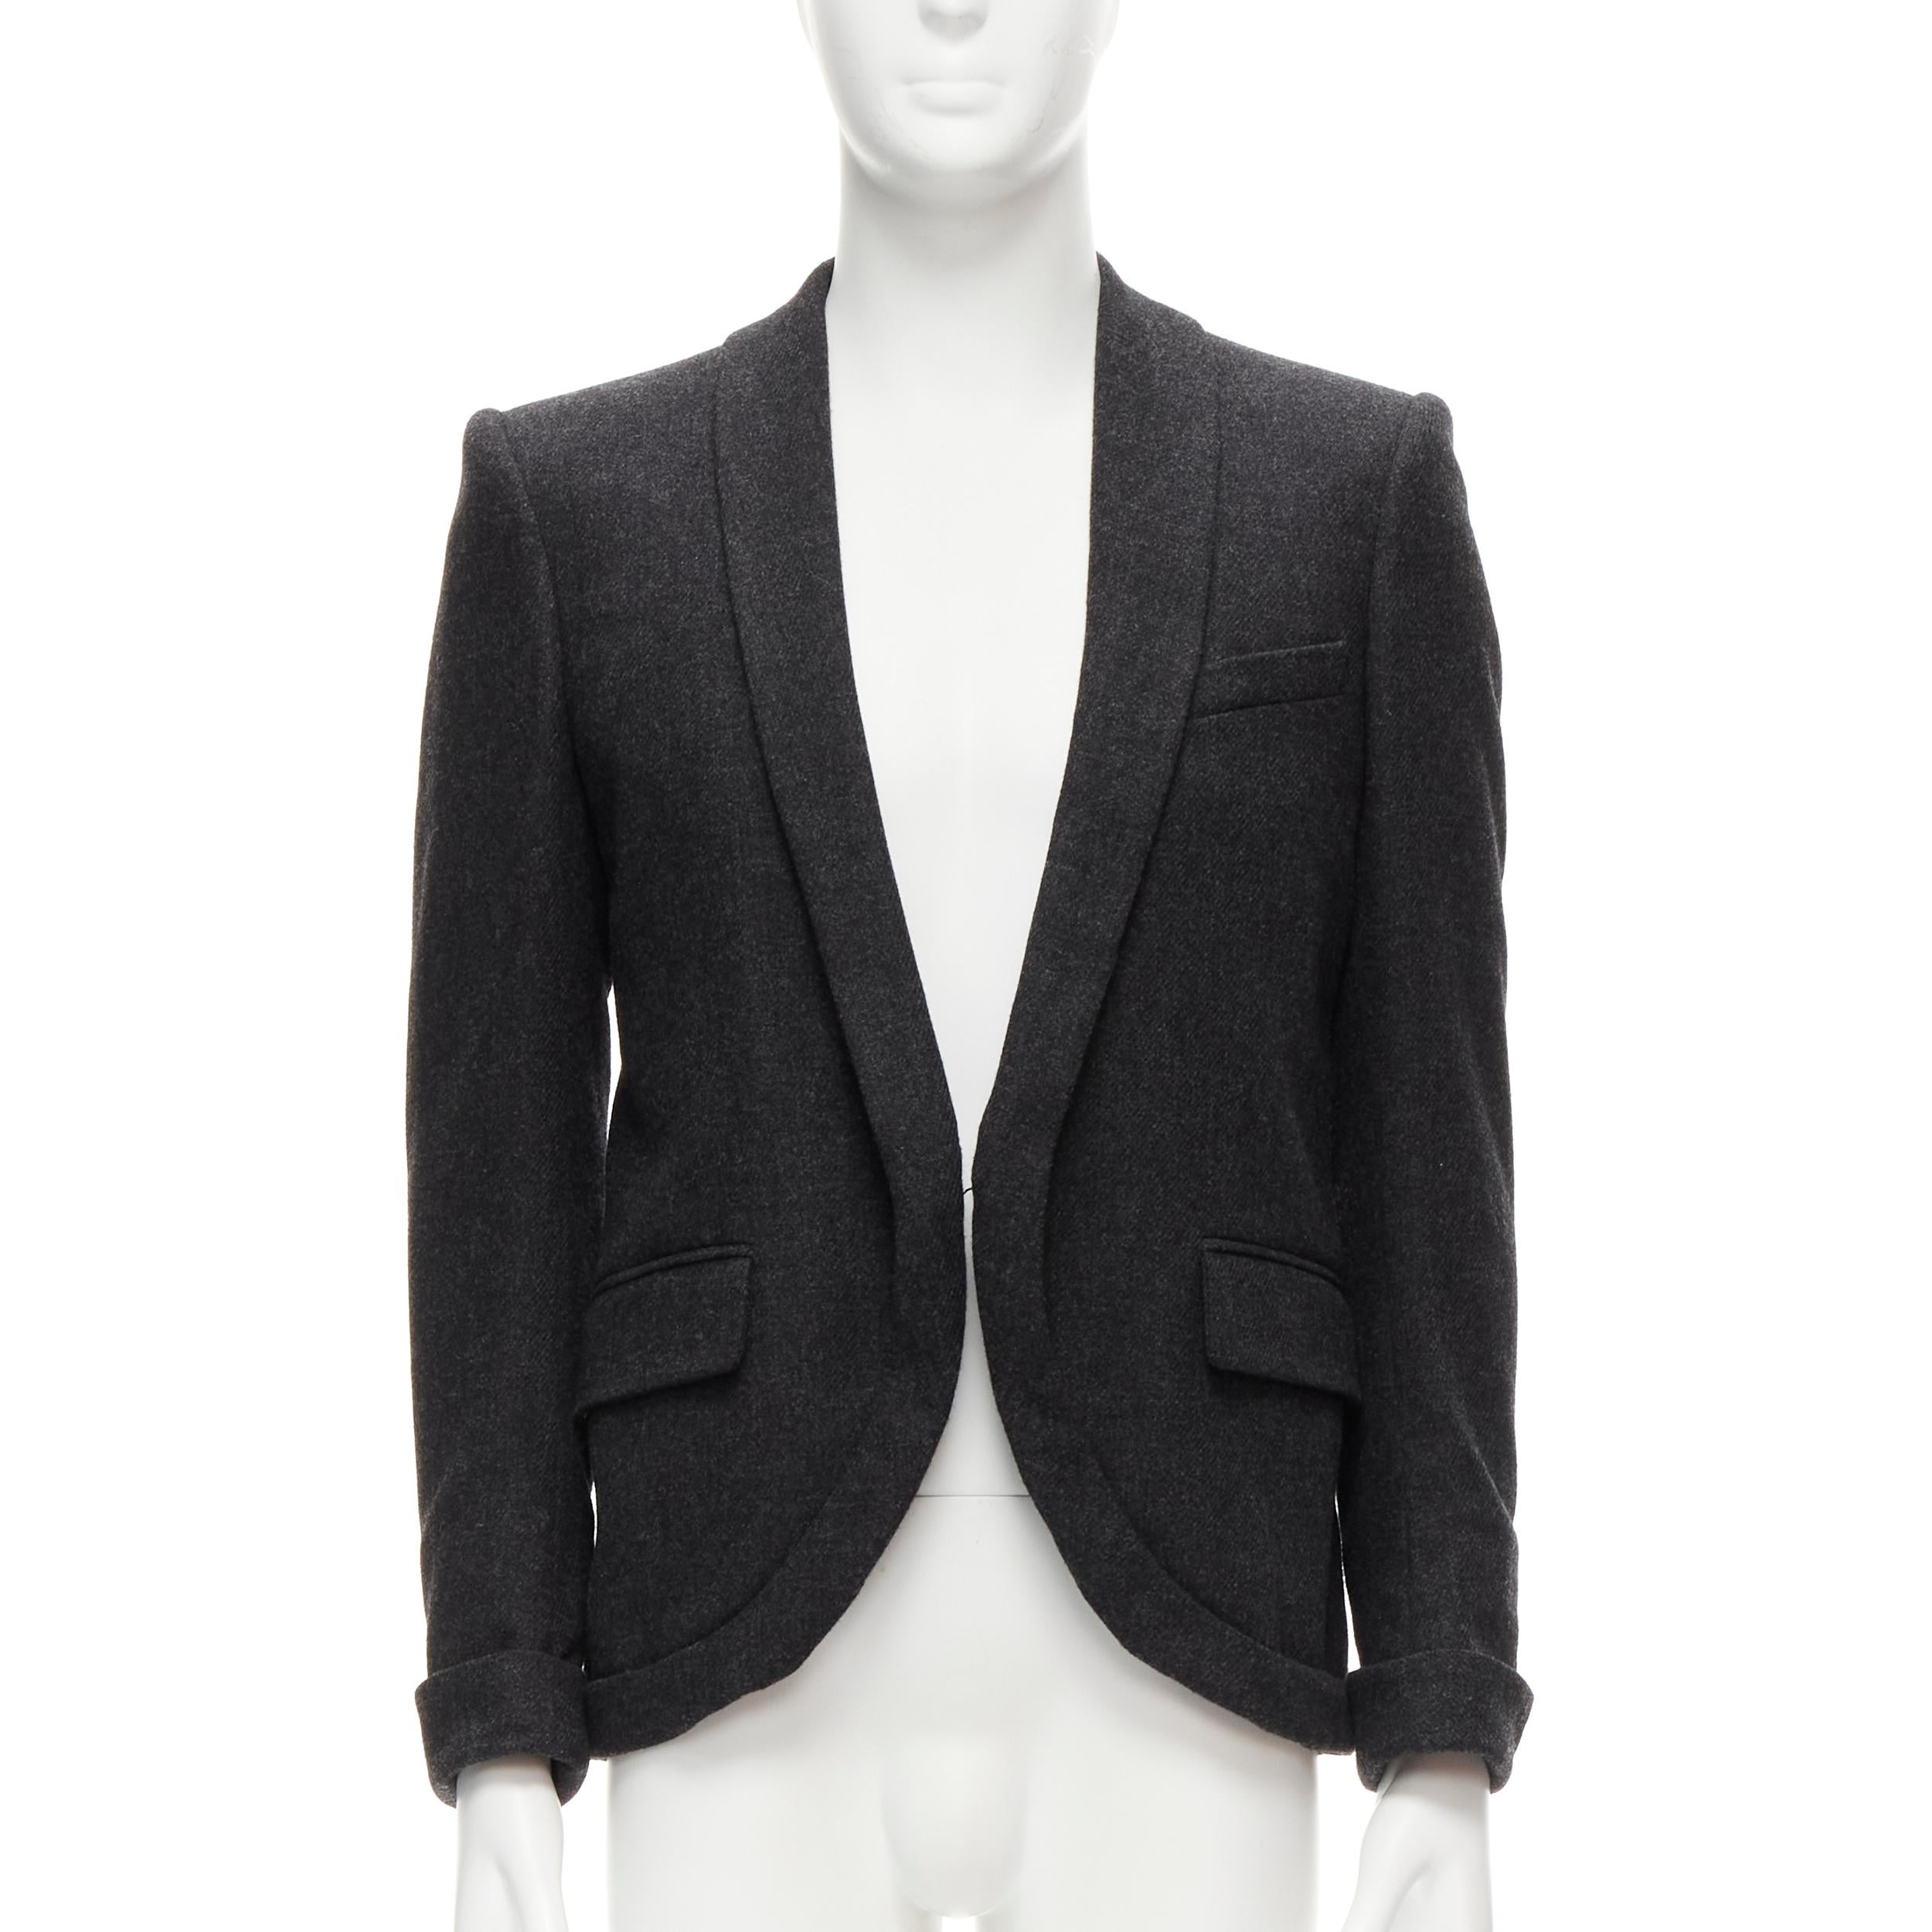 MCQ ALEXANDER MCQUEEN grey wool blend foldover shawl collar blazer jacket EU46 S
Reference: BMPA/A00252
Brand: MCQ Alexander McQueen
Collection: MCQ
Material: Wool, Polyamide
Color: Grey
Pattern: Solid
Closure: Button
Lining: Fabric
Extra Details: